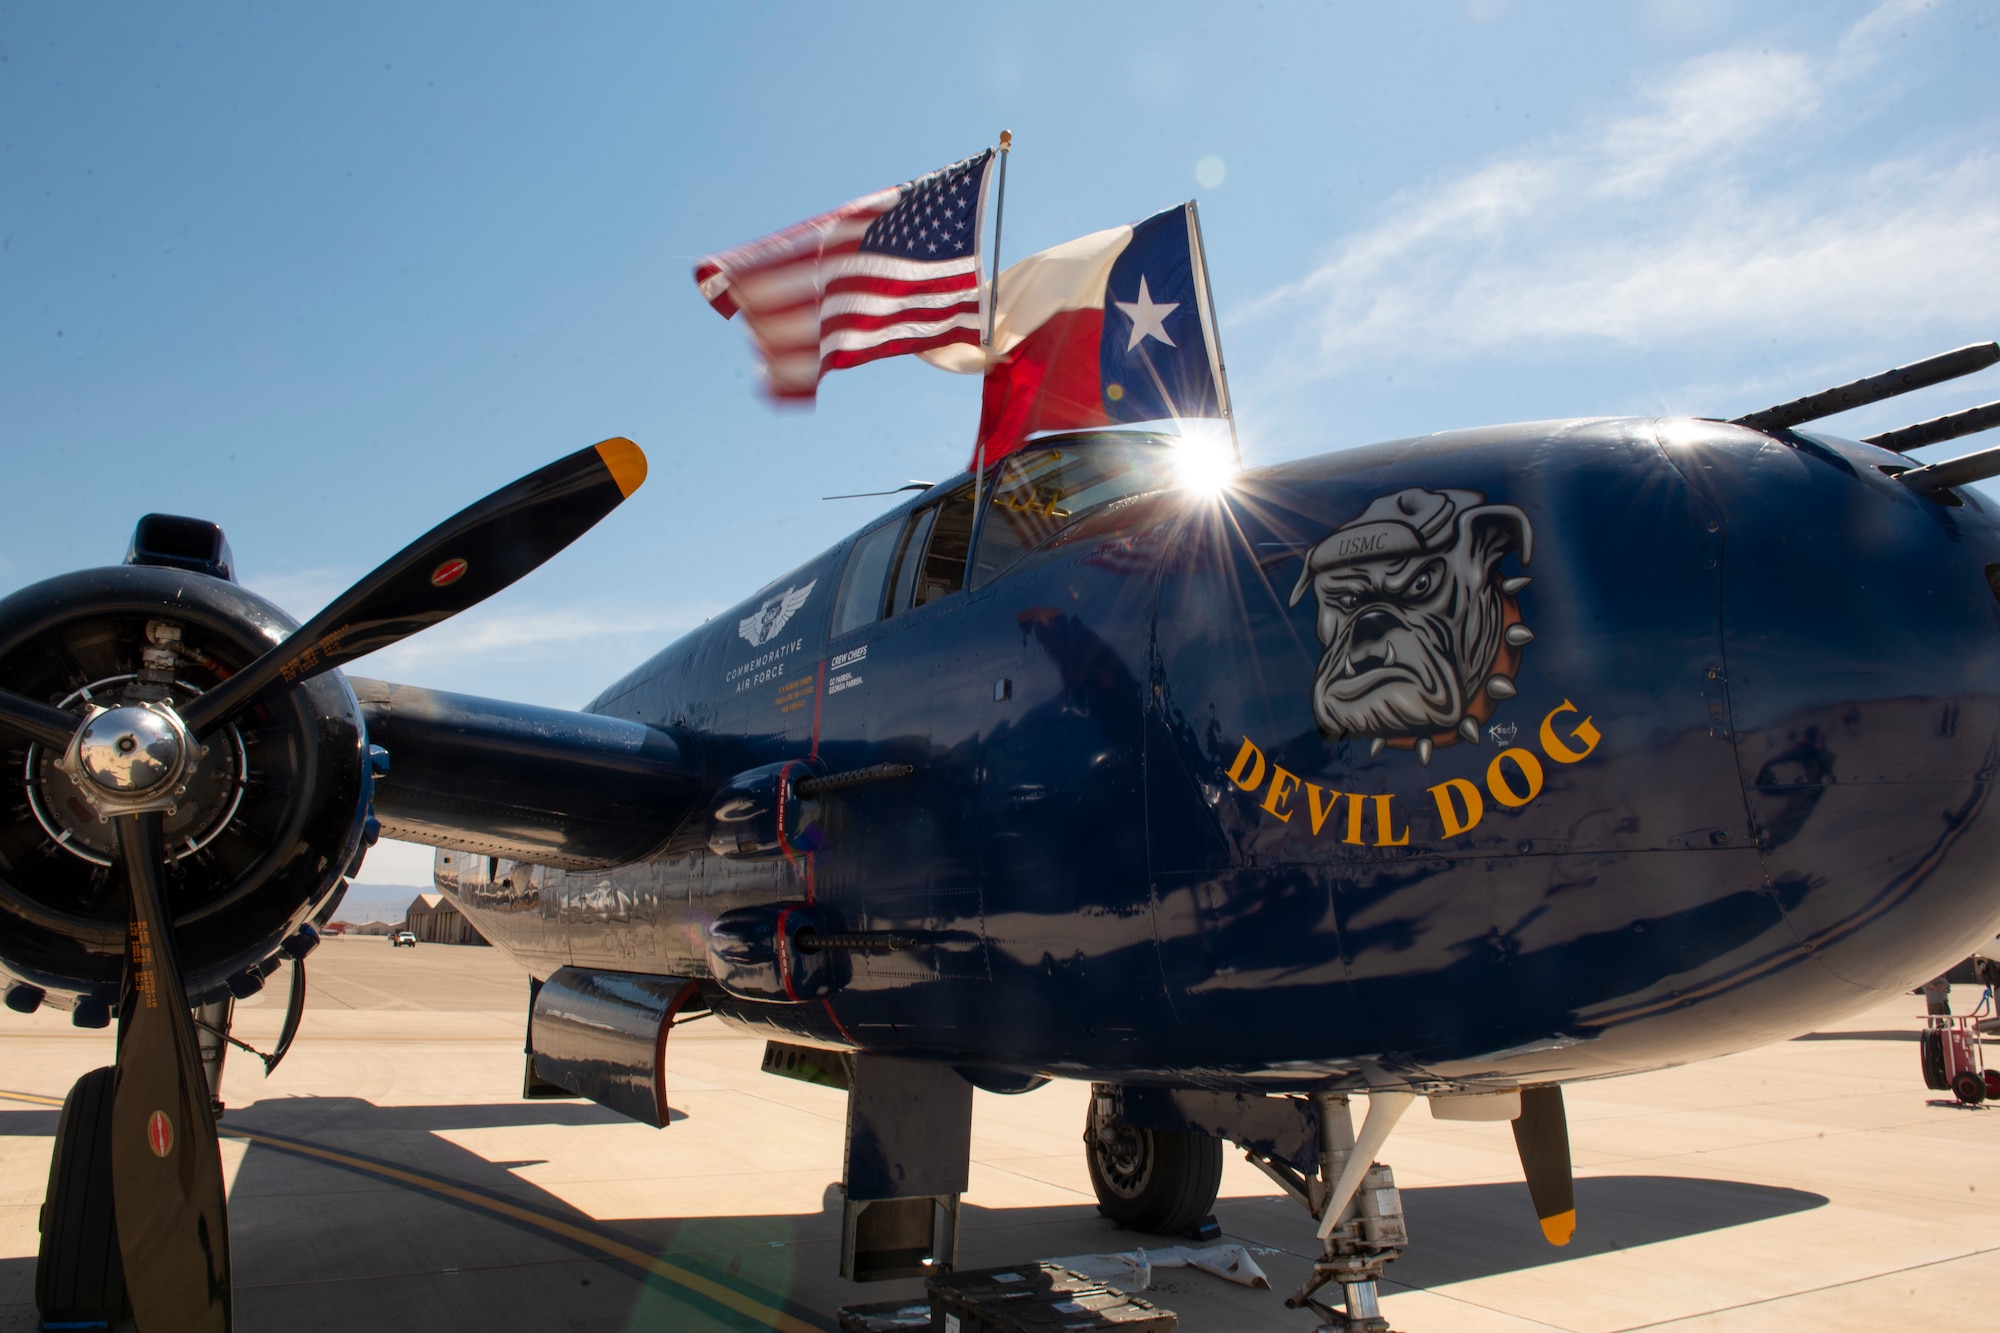 A B-25 Devil Dog from Georgetown, Texas, sits on the flight line May 6, 2022, on Holloman Air Force Base, New Mexico. The B-25 was named after Major General William “Billy” Mitchell one of the pioneers of military aviation and is one of the many displays scheduled for the 2022 Legacy of Liberty Air Show and Open House. (U.S. Air Force photo by Airman 1st Class Nicholas Paczkowski)